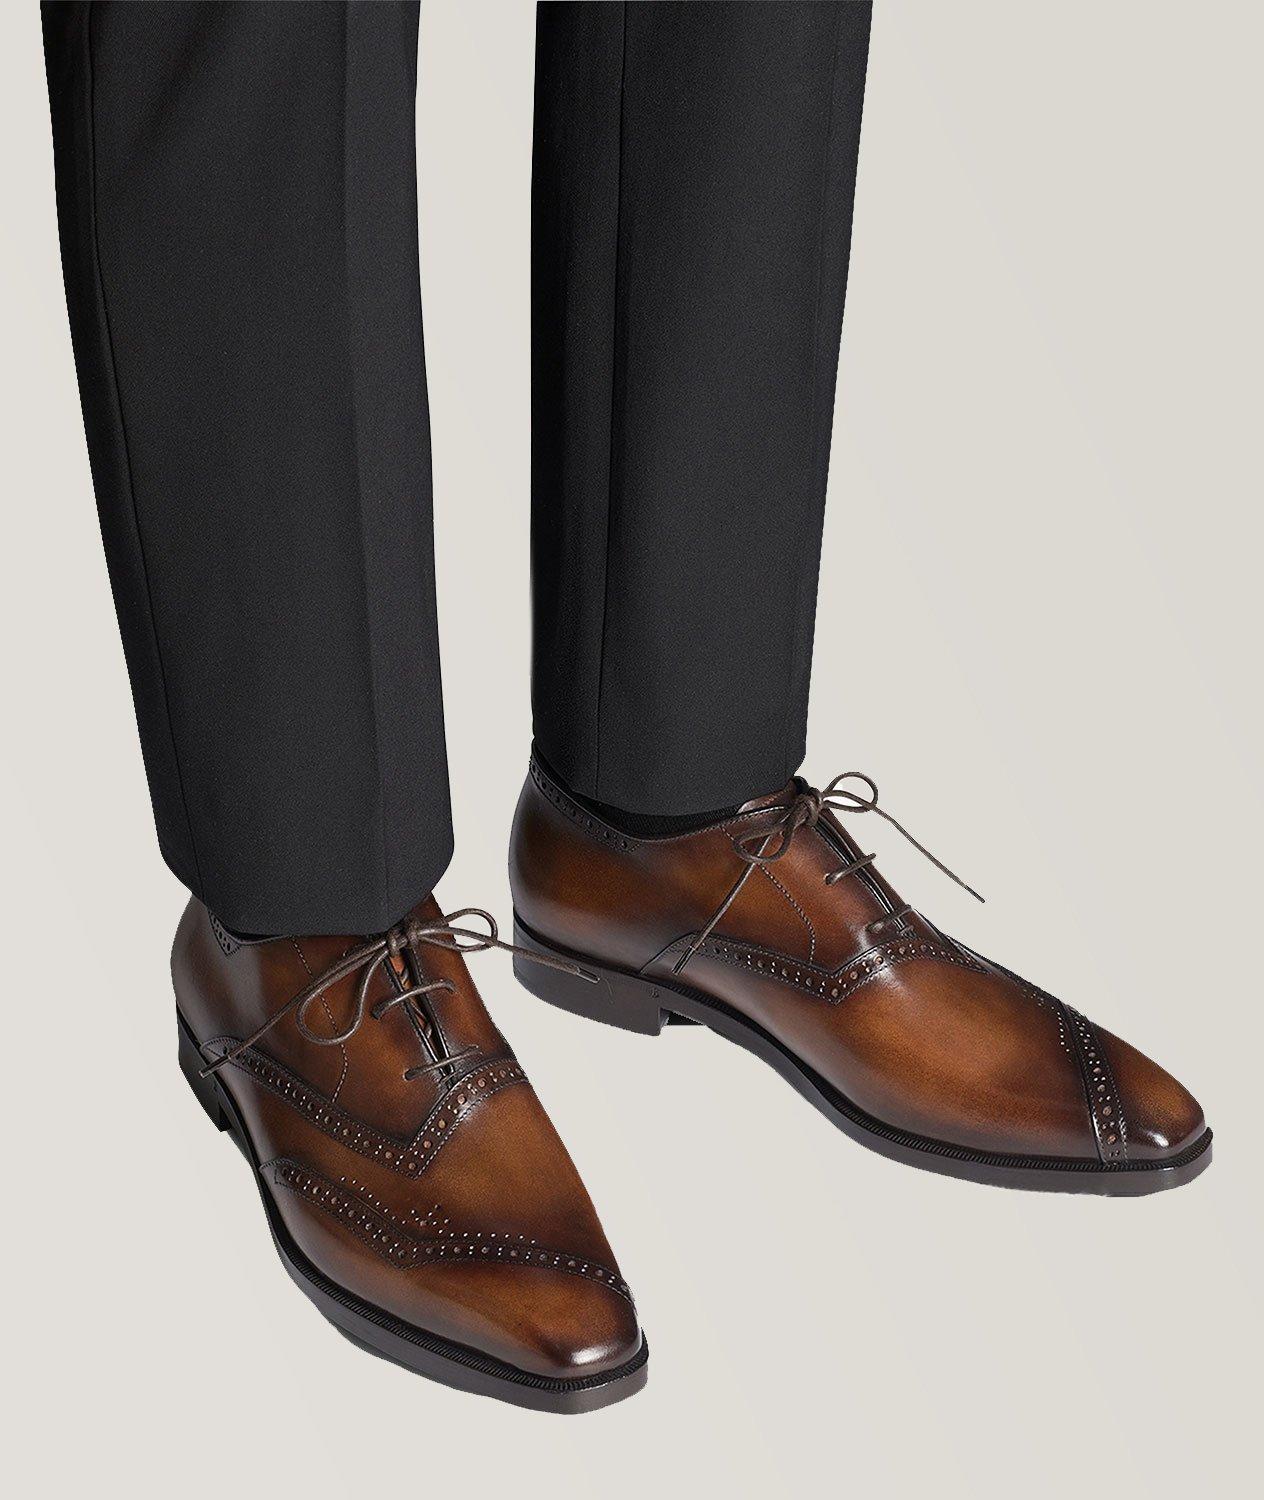 Asymmetric Broque Leather Oxford  image 6